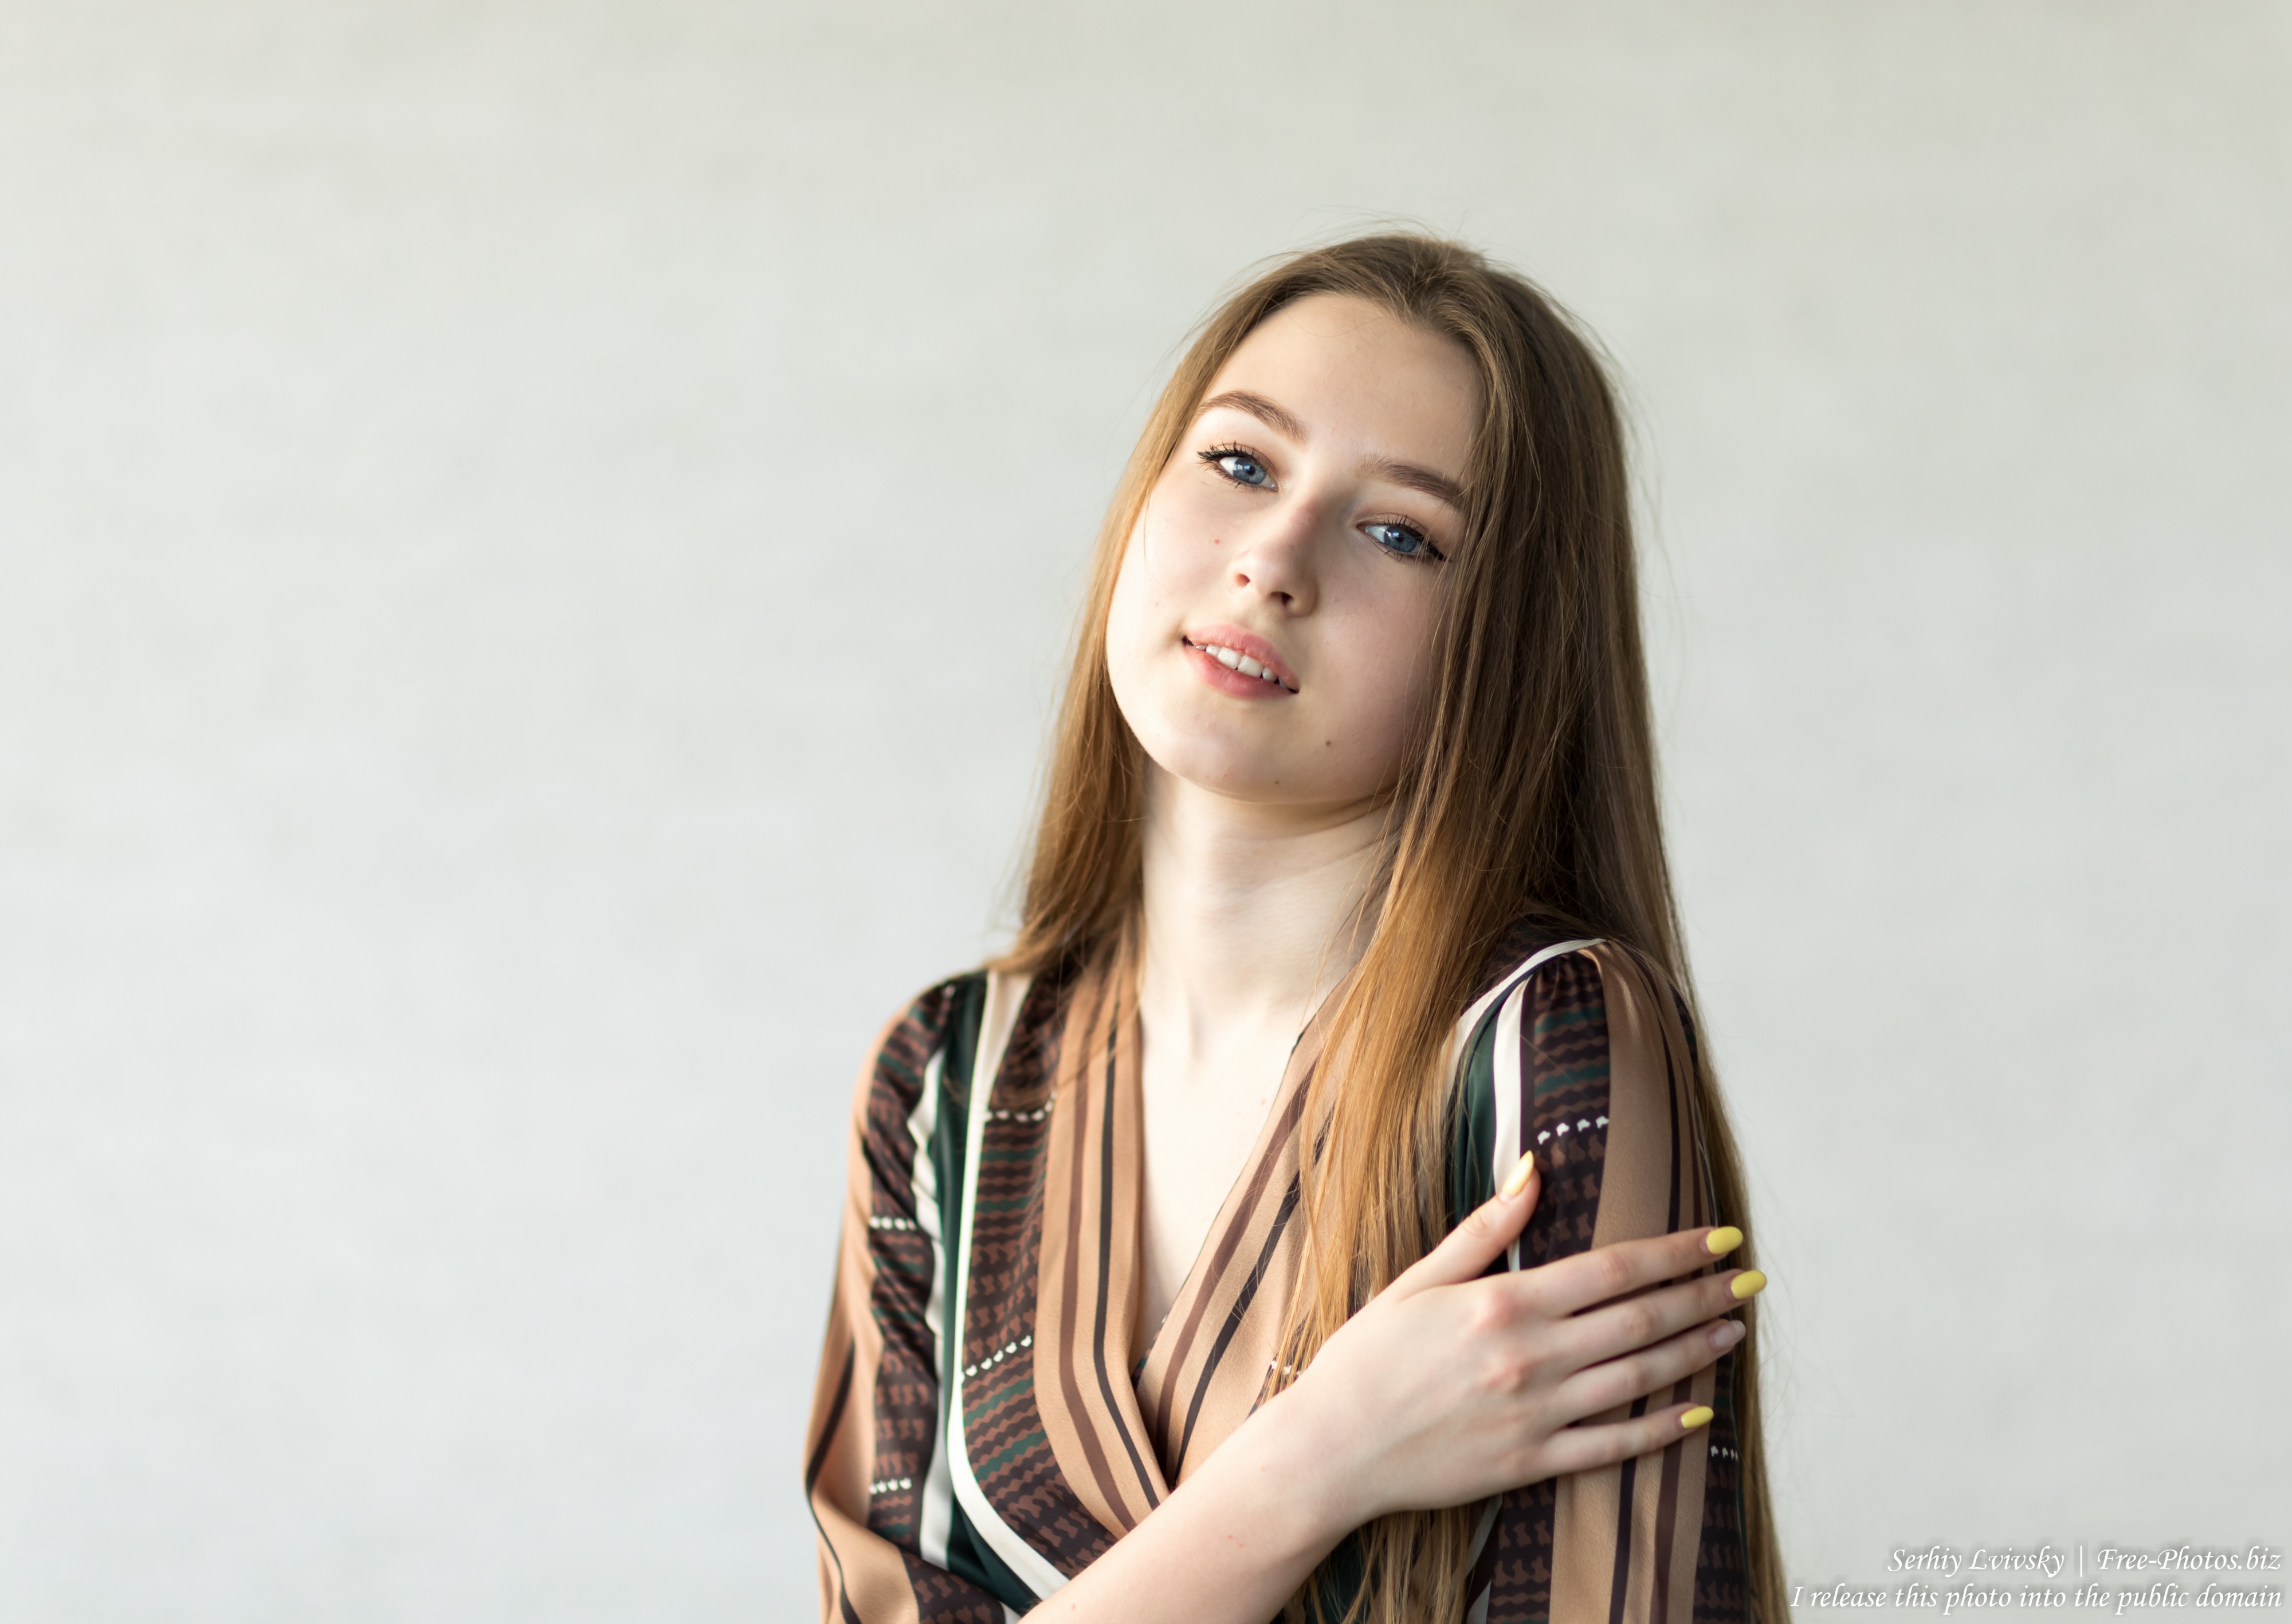 Vika - a 17-year-old girl with blue eyes and natural fair hair photographed in June 2019 by Serhiy Lvivsky, picture 2